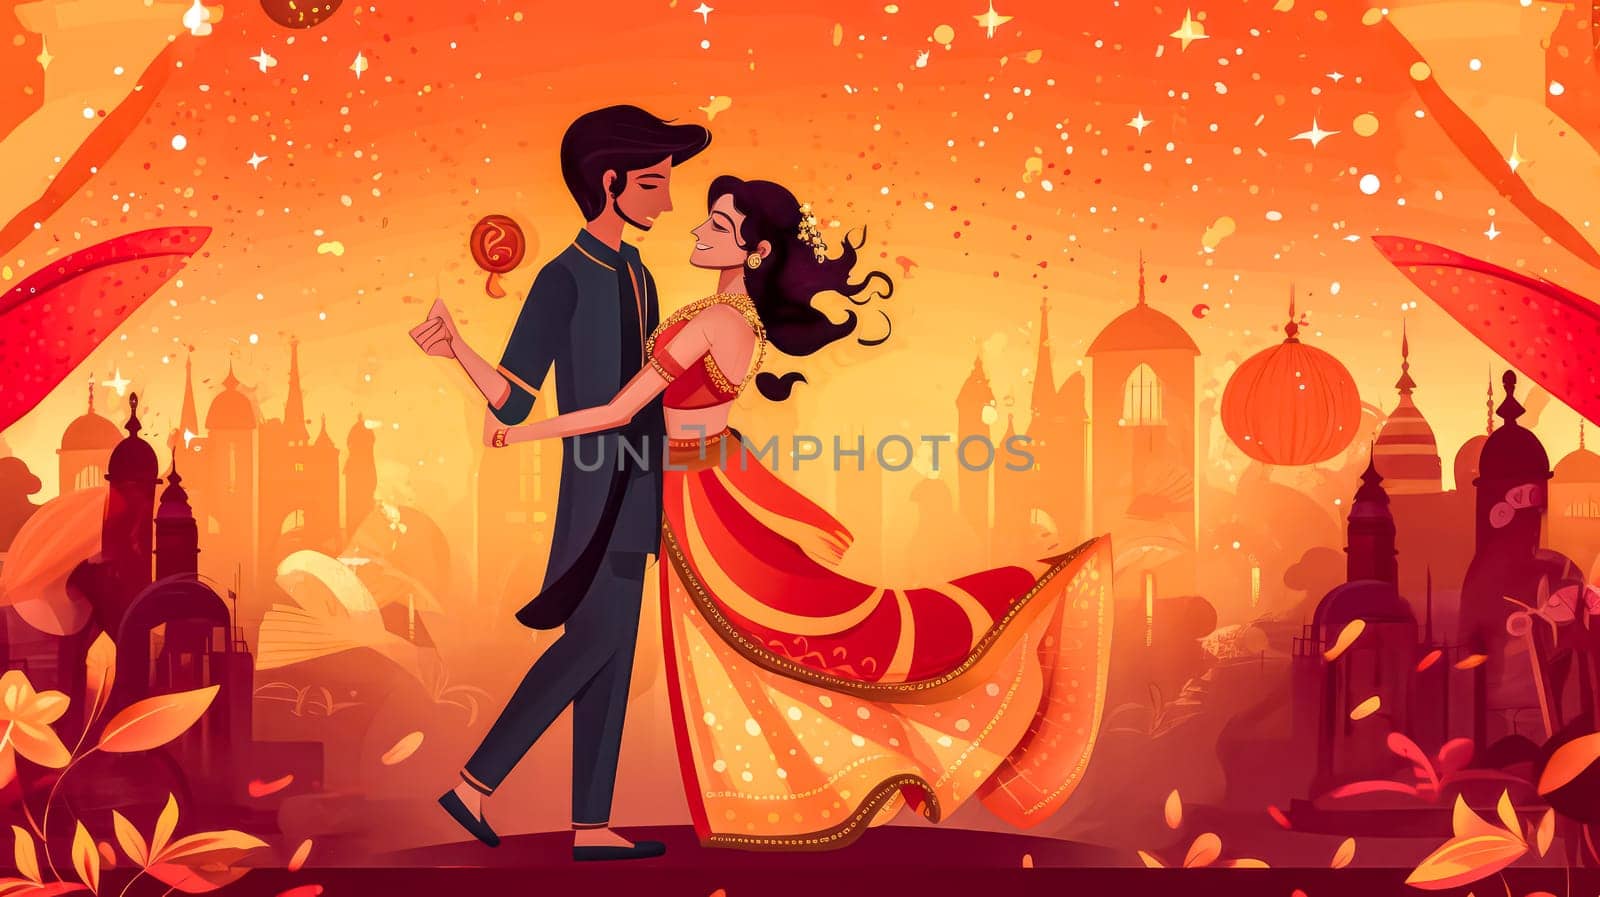 Celebrate the joyous occasion of Diwali with this vibrant illustration by Alla_Morozova93